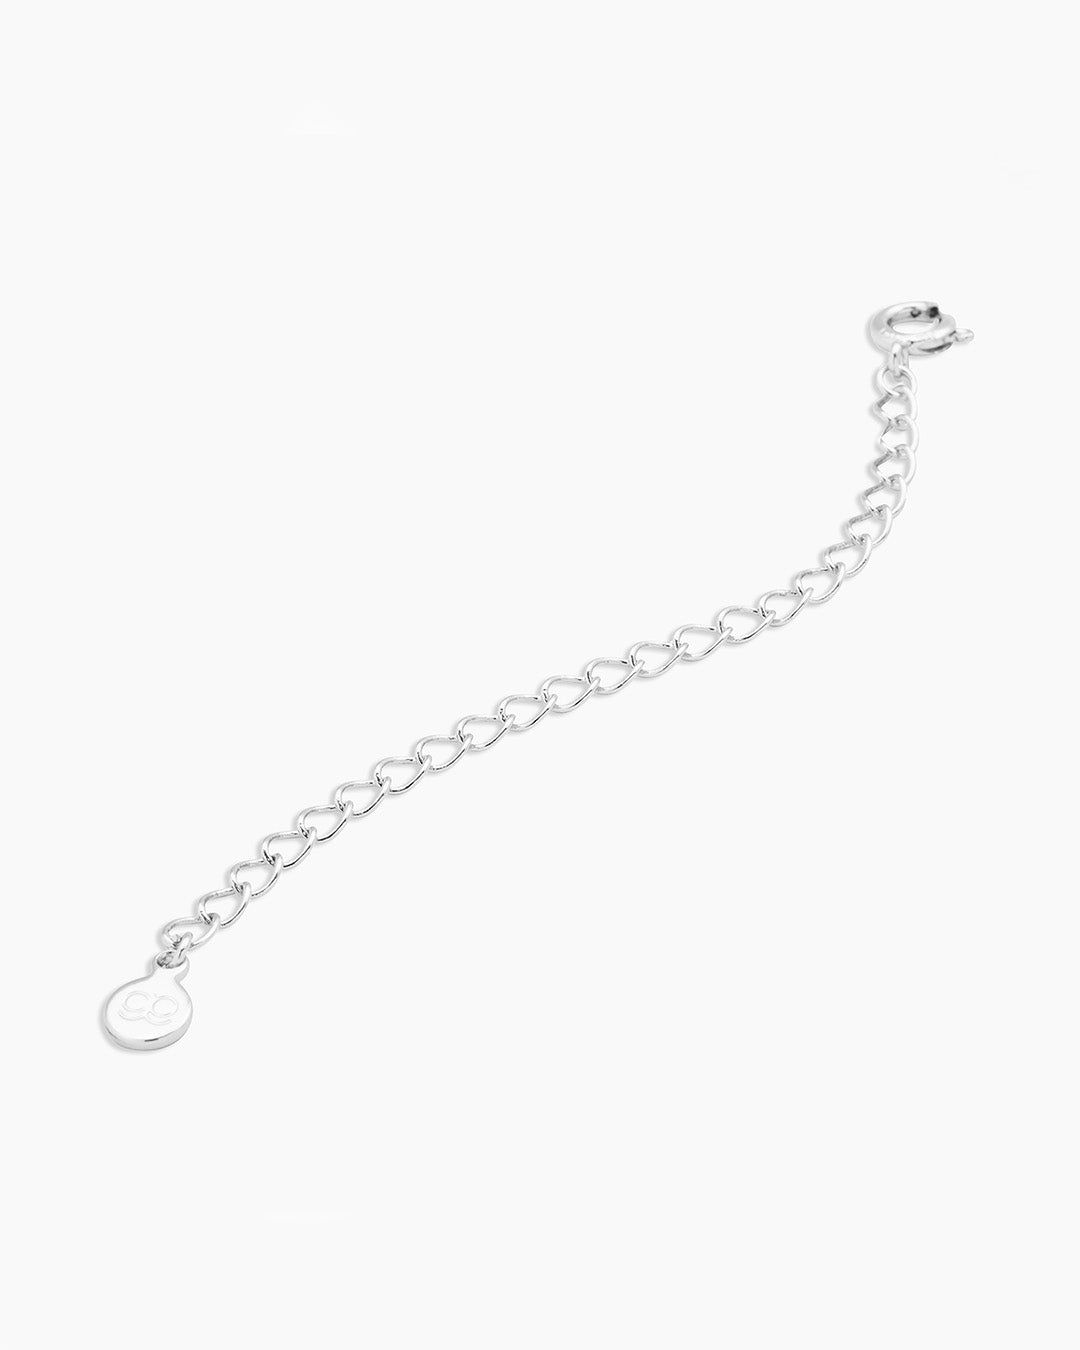 3 Necklace Extender Chain [Sterling Silver]